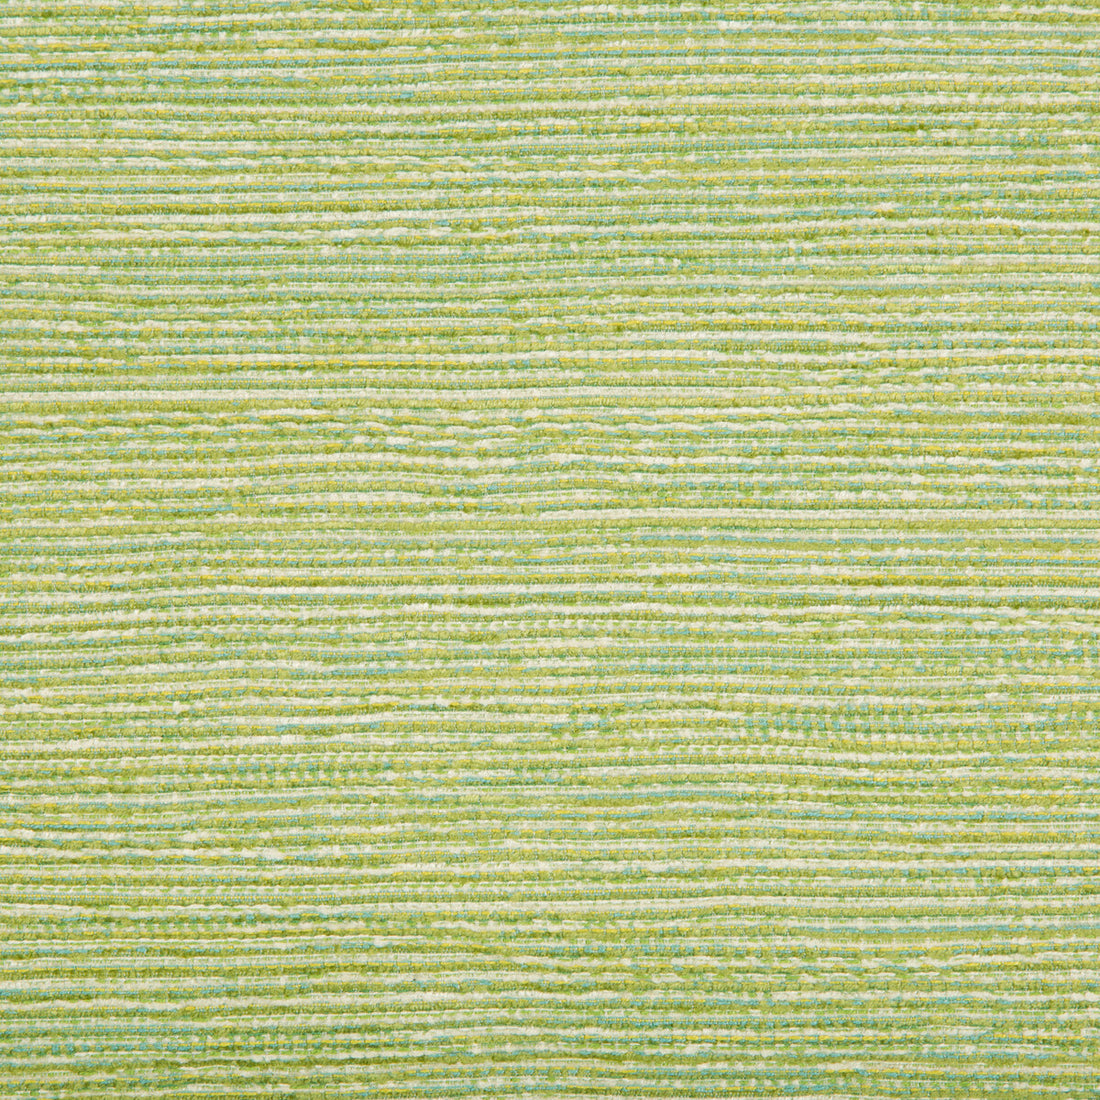 Kravet Contract fabric in 34734-23 color - pattern 34734.23.0 - by Kravet Contract in the Crypton Incase collection